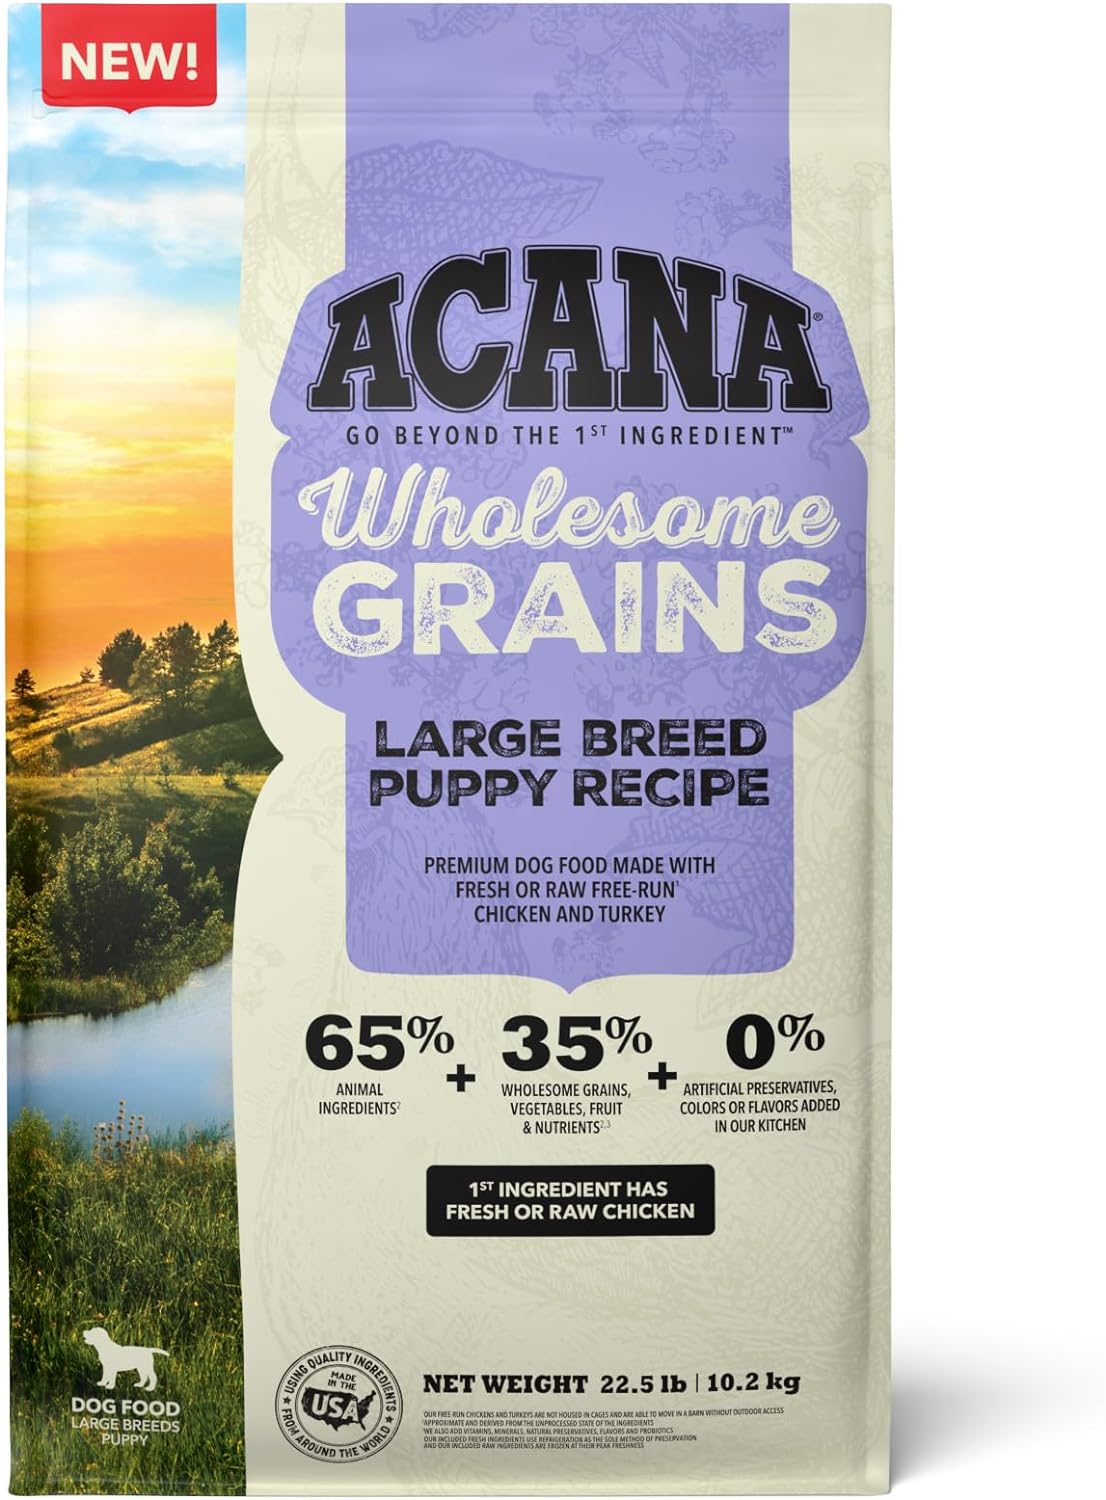 ACANA Wholesome Grains Dry Dog Food, Large Breed Puppy Recipe, Chicken Dog Food, 22.5lb